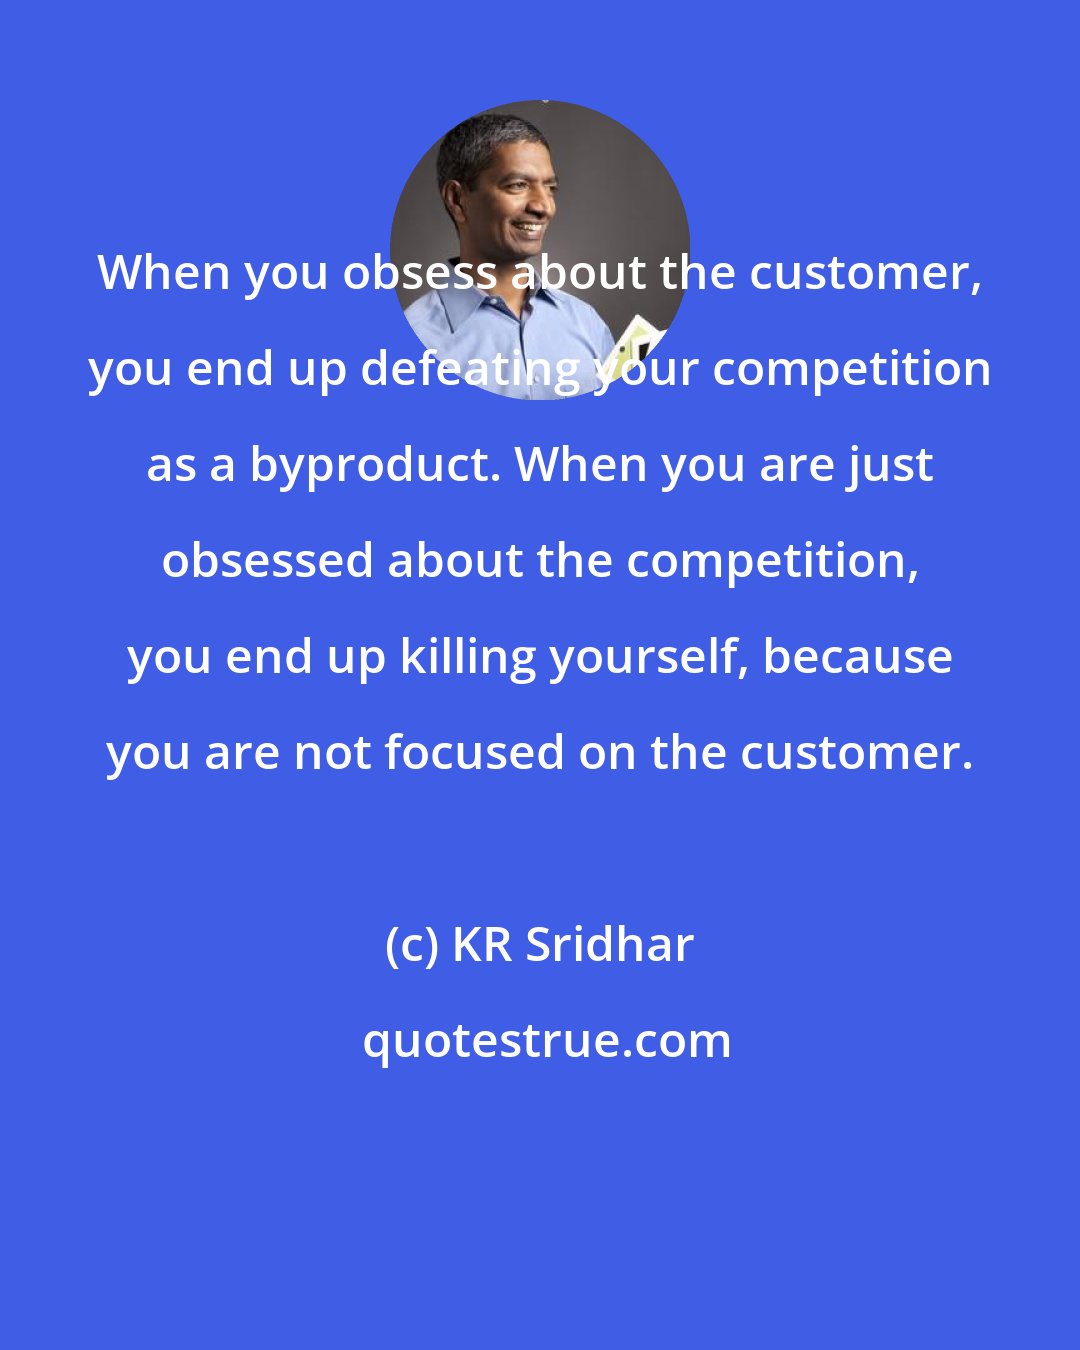 KR Sridhar: When you obsess about the customer, you end up defeating your competition as a byproduct. When you are just obsessed about the competition, you end up killing yourself, because you are not focused on the customer.